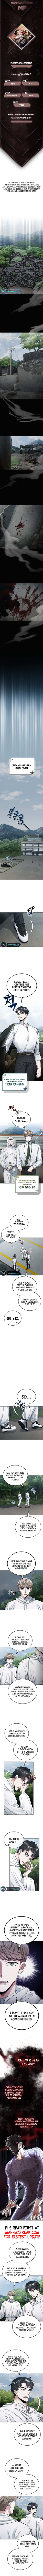 Post-Pandemic - Page 2